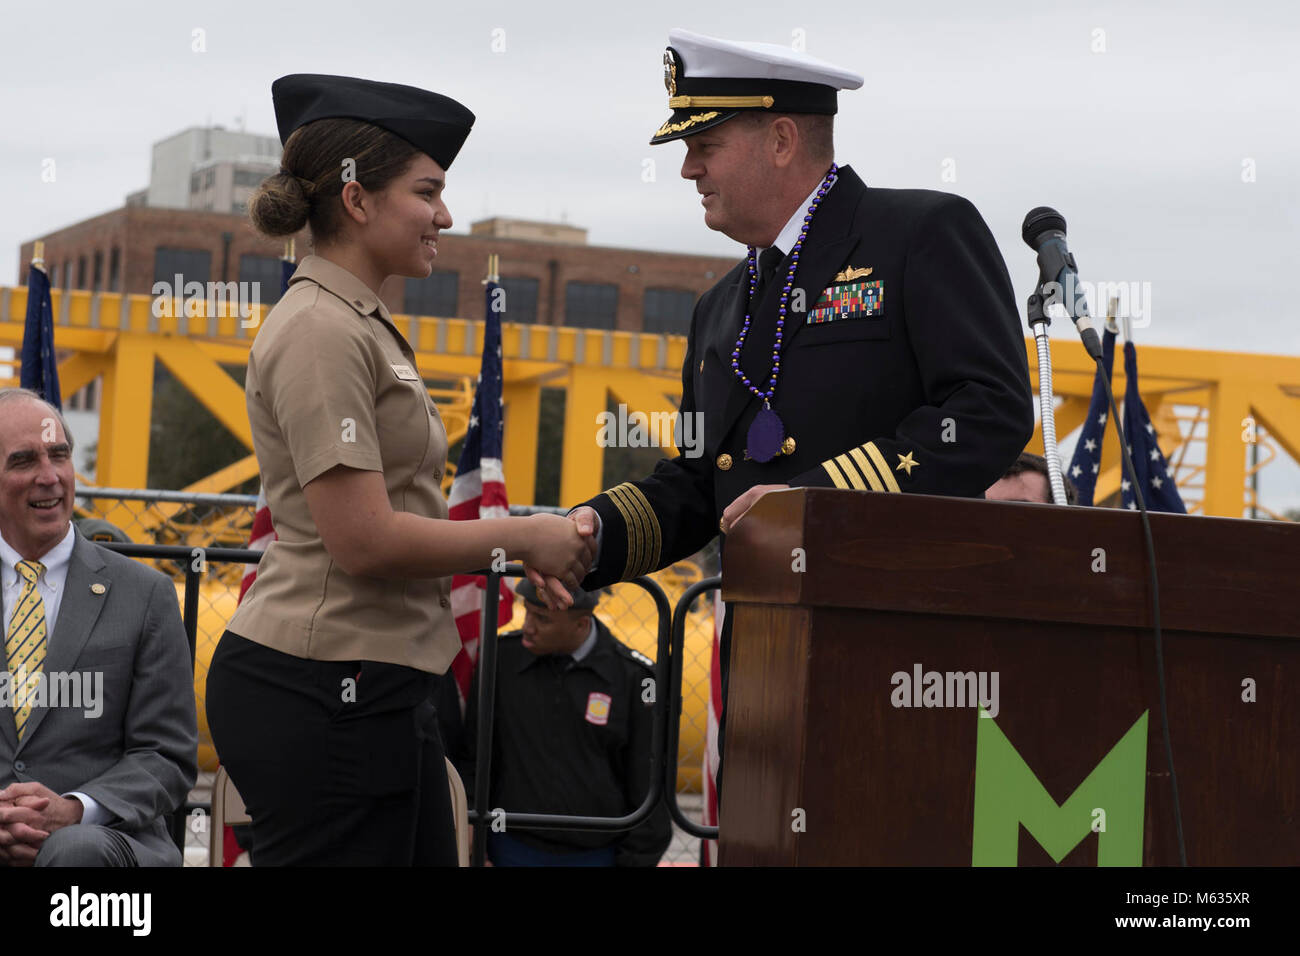 MOBILE, Ala (Feb. 9, 2018) Capt. Peter K. Nilsen, commanding officer of the guided-missile cruiser USS Philippine Sea (CG 58),  hands Navy Junior Reserve Officer Training Corps cadet Shaneylitza Martinez a challenge coin during a ceremony celebrating Philippine Sea's arrival in Mobile, Ala. The ship is participating in Mardi Gras celebrations during a scheduled port visit, which provides area residents an opportunity to learn about the Navy. (U.S. Navy Stock Photo